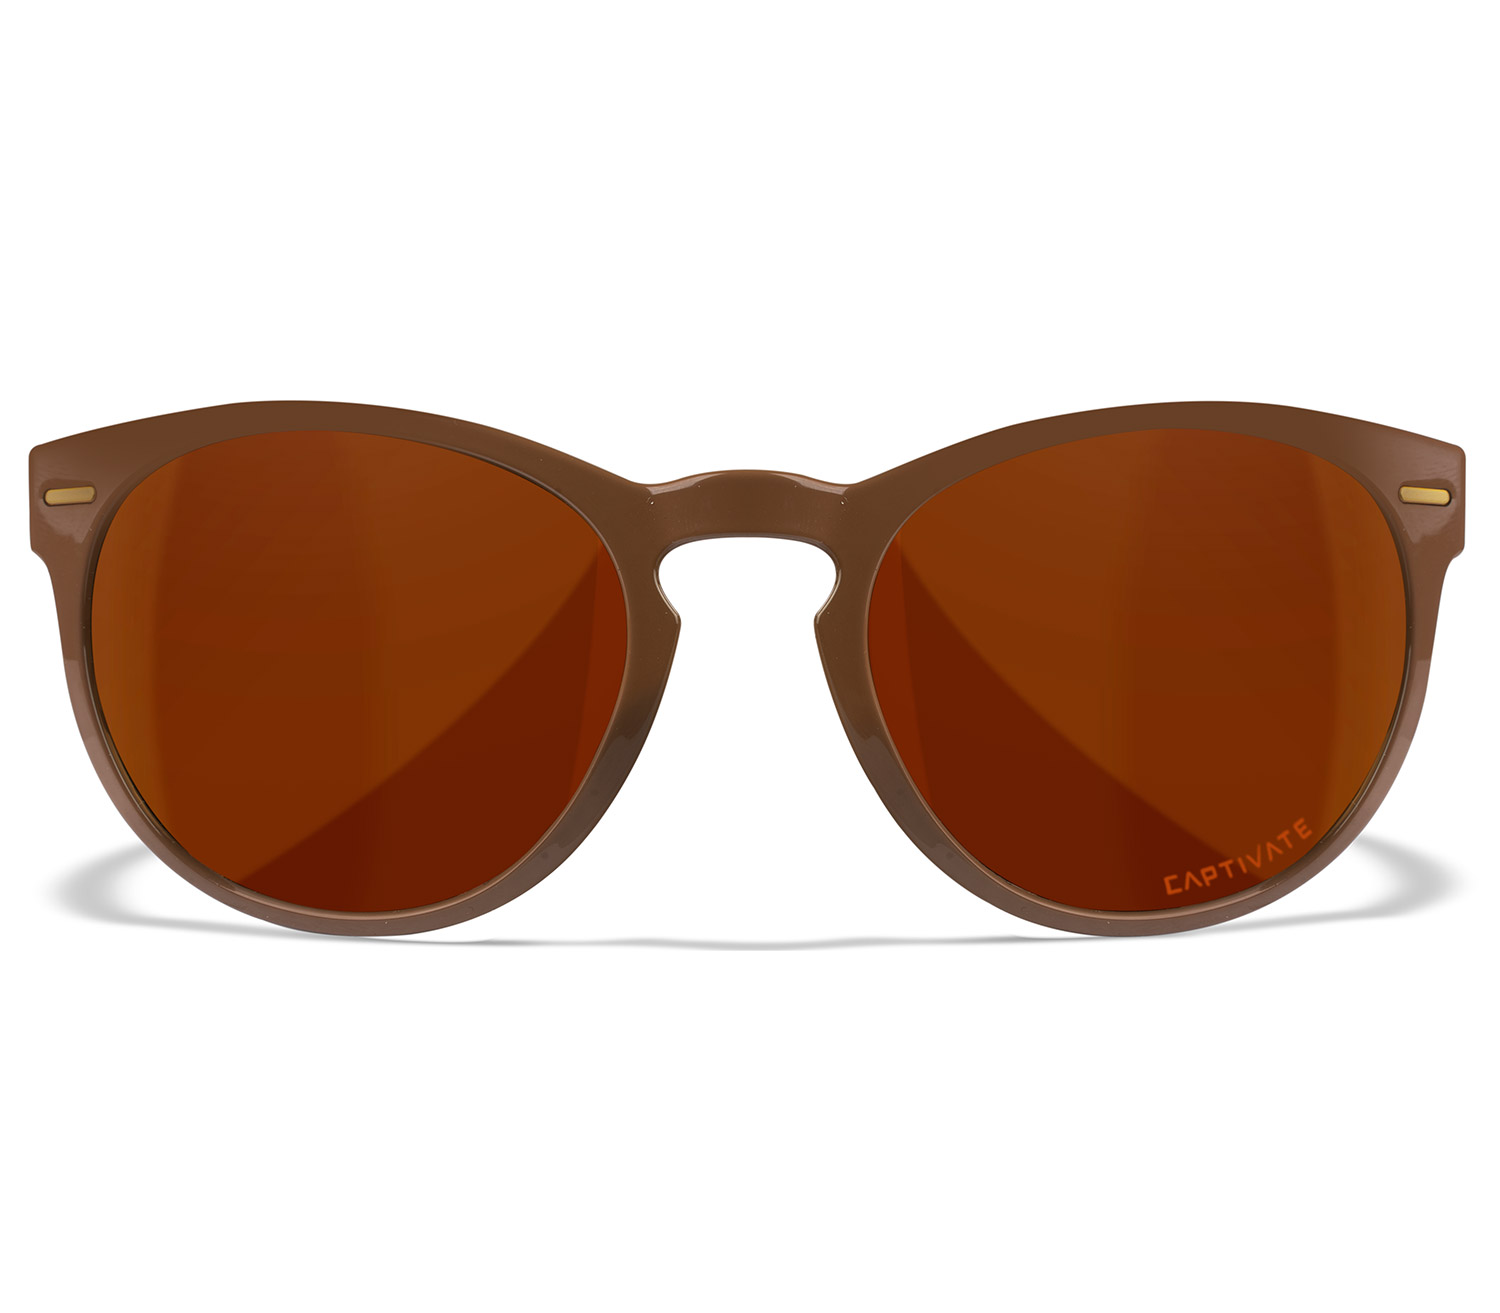 Gafas Wiley X Covert Captivate Copper frontal